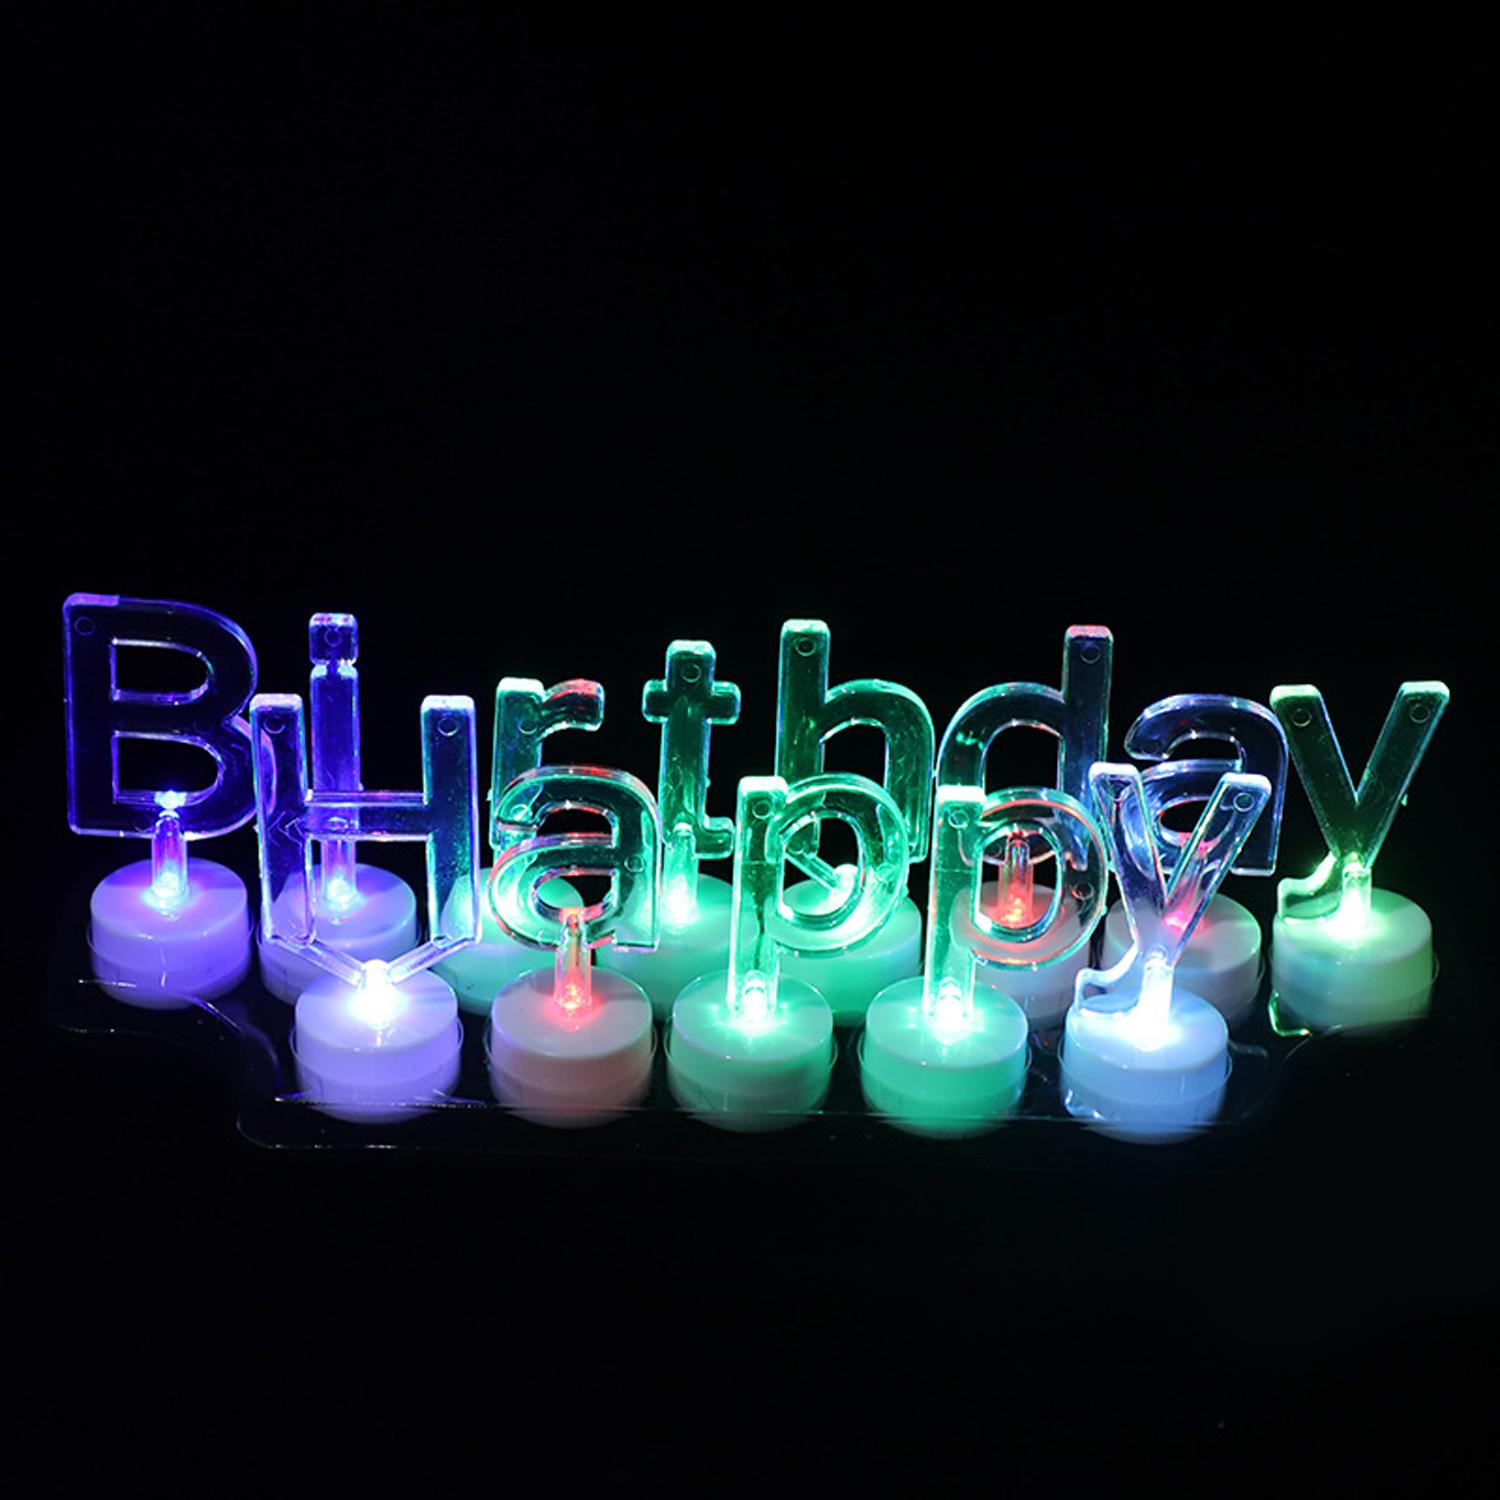 LED CANDLE HAPPY BIRTHDAY LETTERS